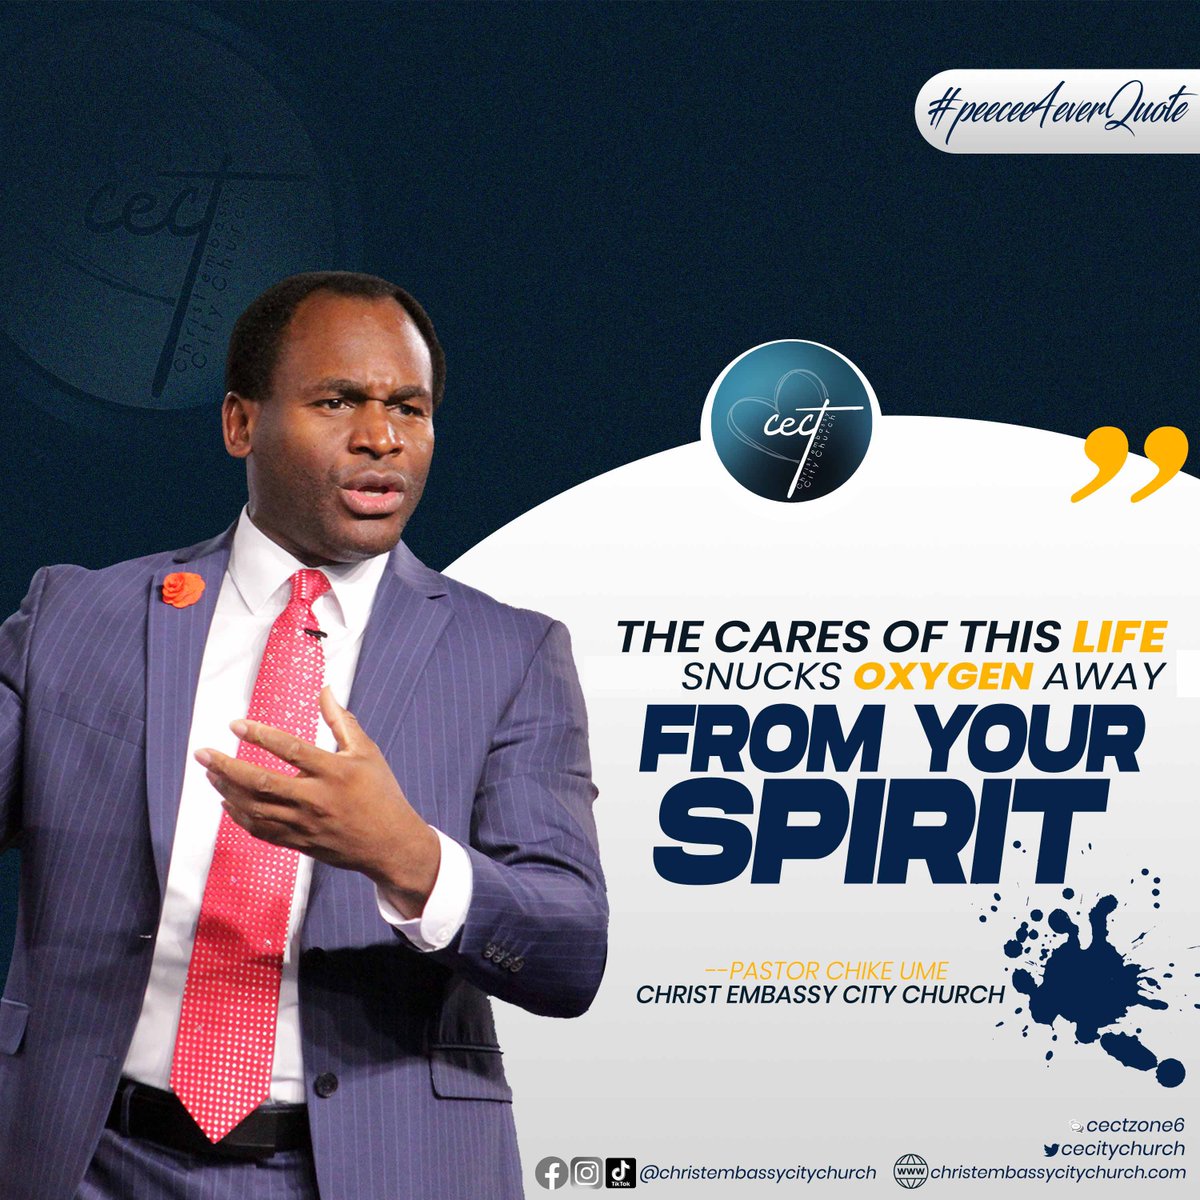 “Cast your cares on God and He’ll sustain you - Psalm 55:22”
Refuse to focus on the cares of this life.

#peecee4everquote
#cect
#christembassy #loveworldnation #loveworldsat  #loveworldnetworks #meditation #pastorchrisoyakhilome #pastorchristeaching #pastorchrisgeneration